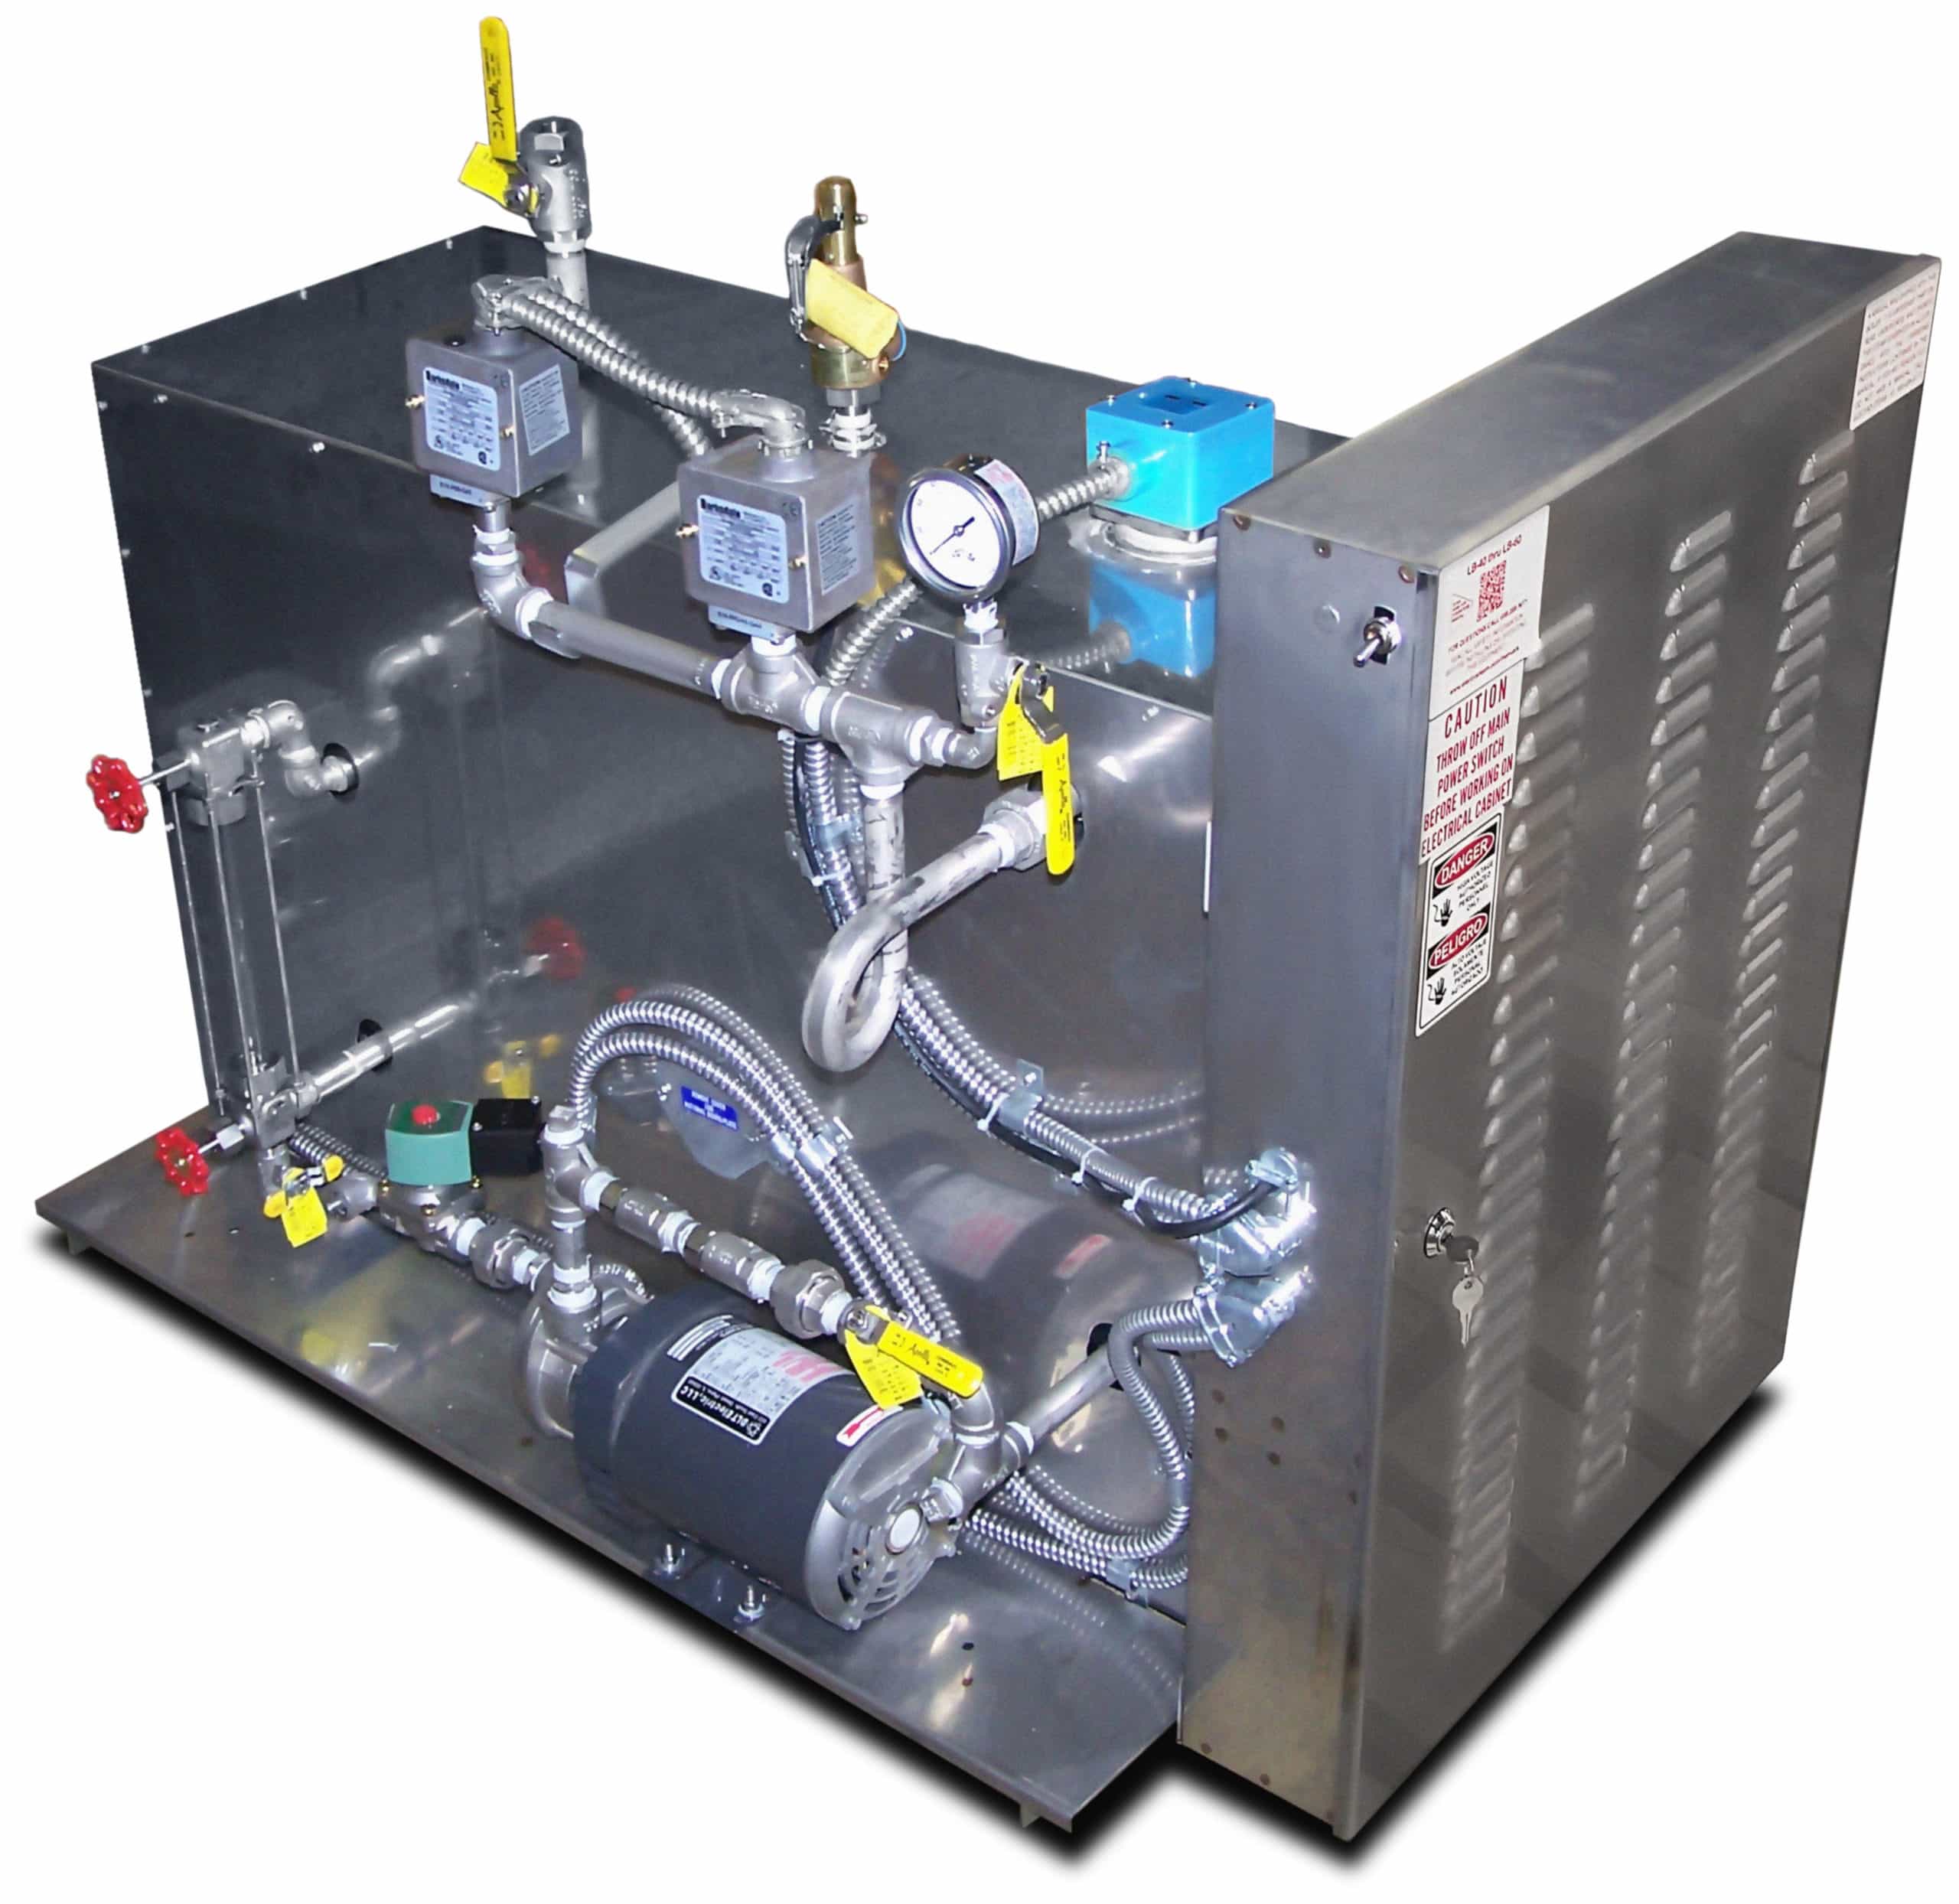 Electric Steam Boilers - Reliable, Energy-Efficient